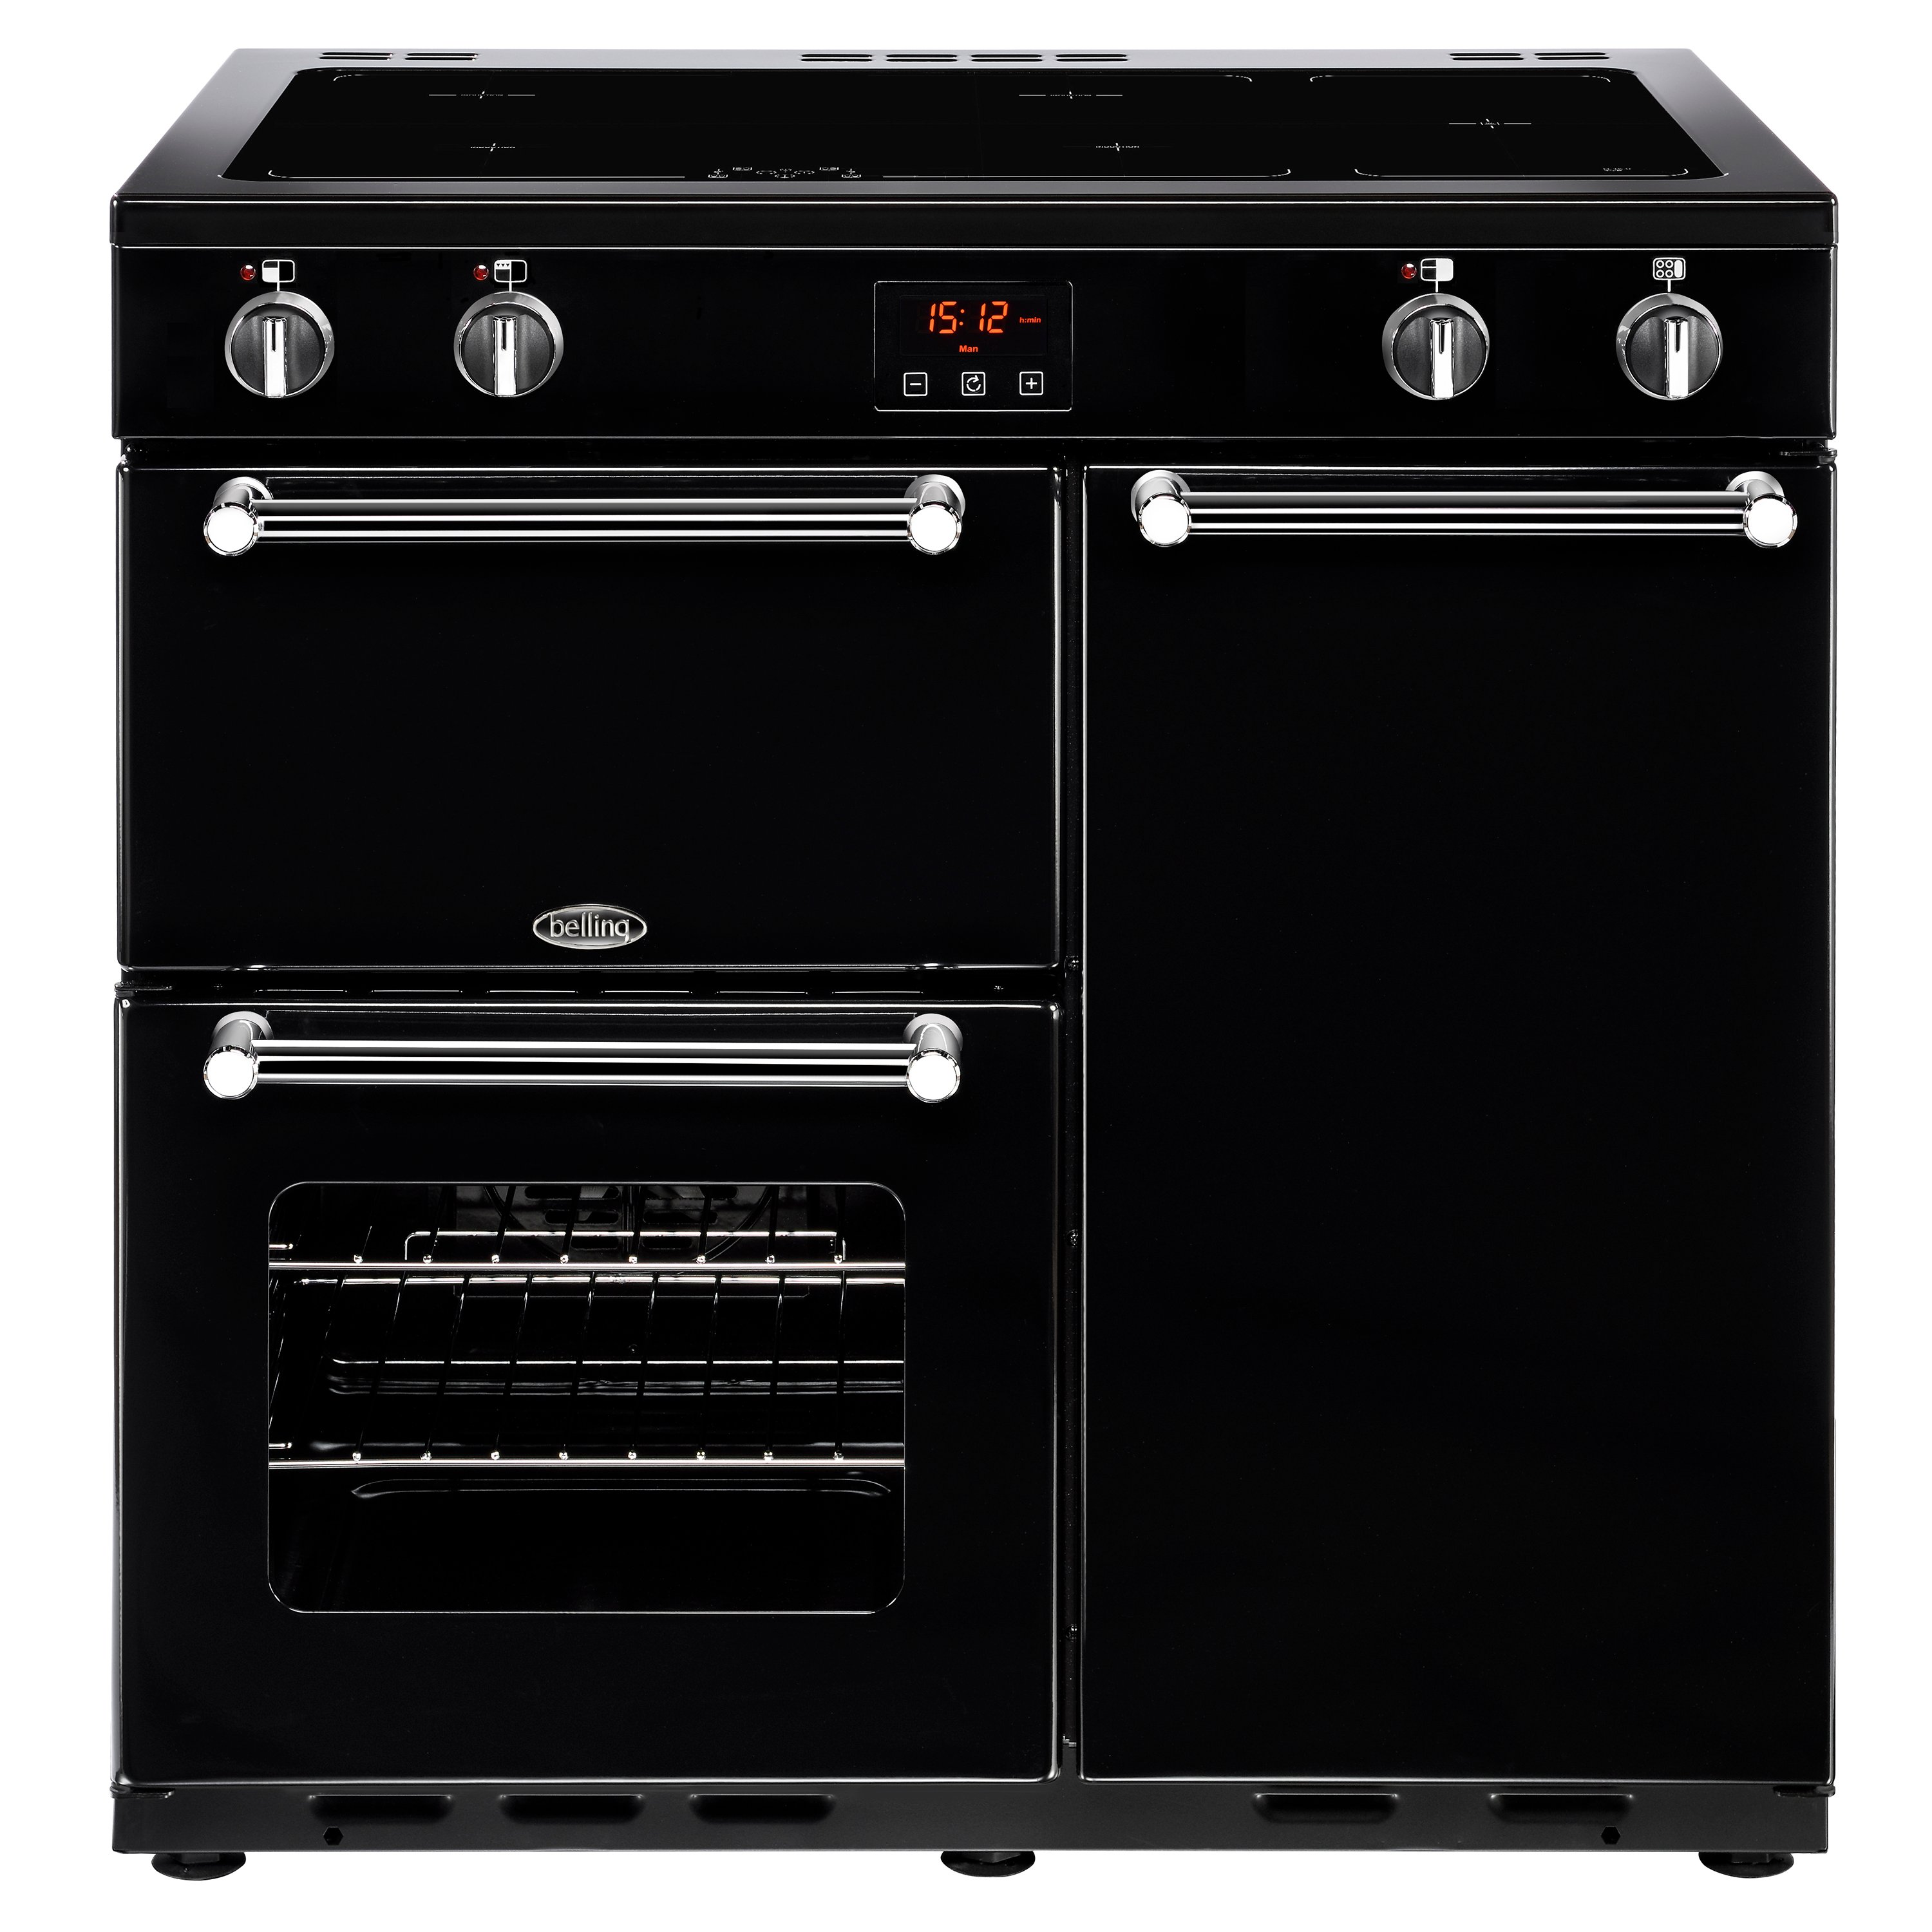 90cm electric range cooker with 4 zone induction hob, additional warming zone, conventional oven and grill, fanned main oven and tall fanned oven. Requires 32A connection.